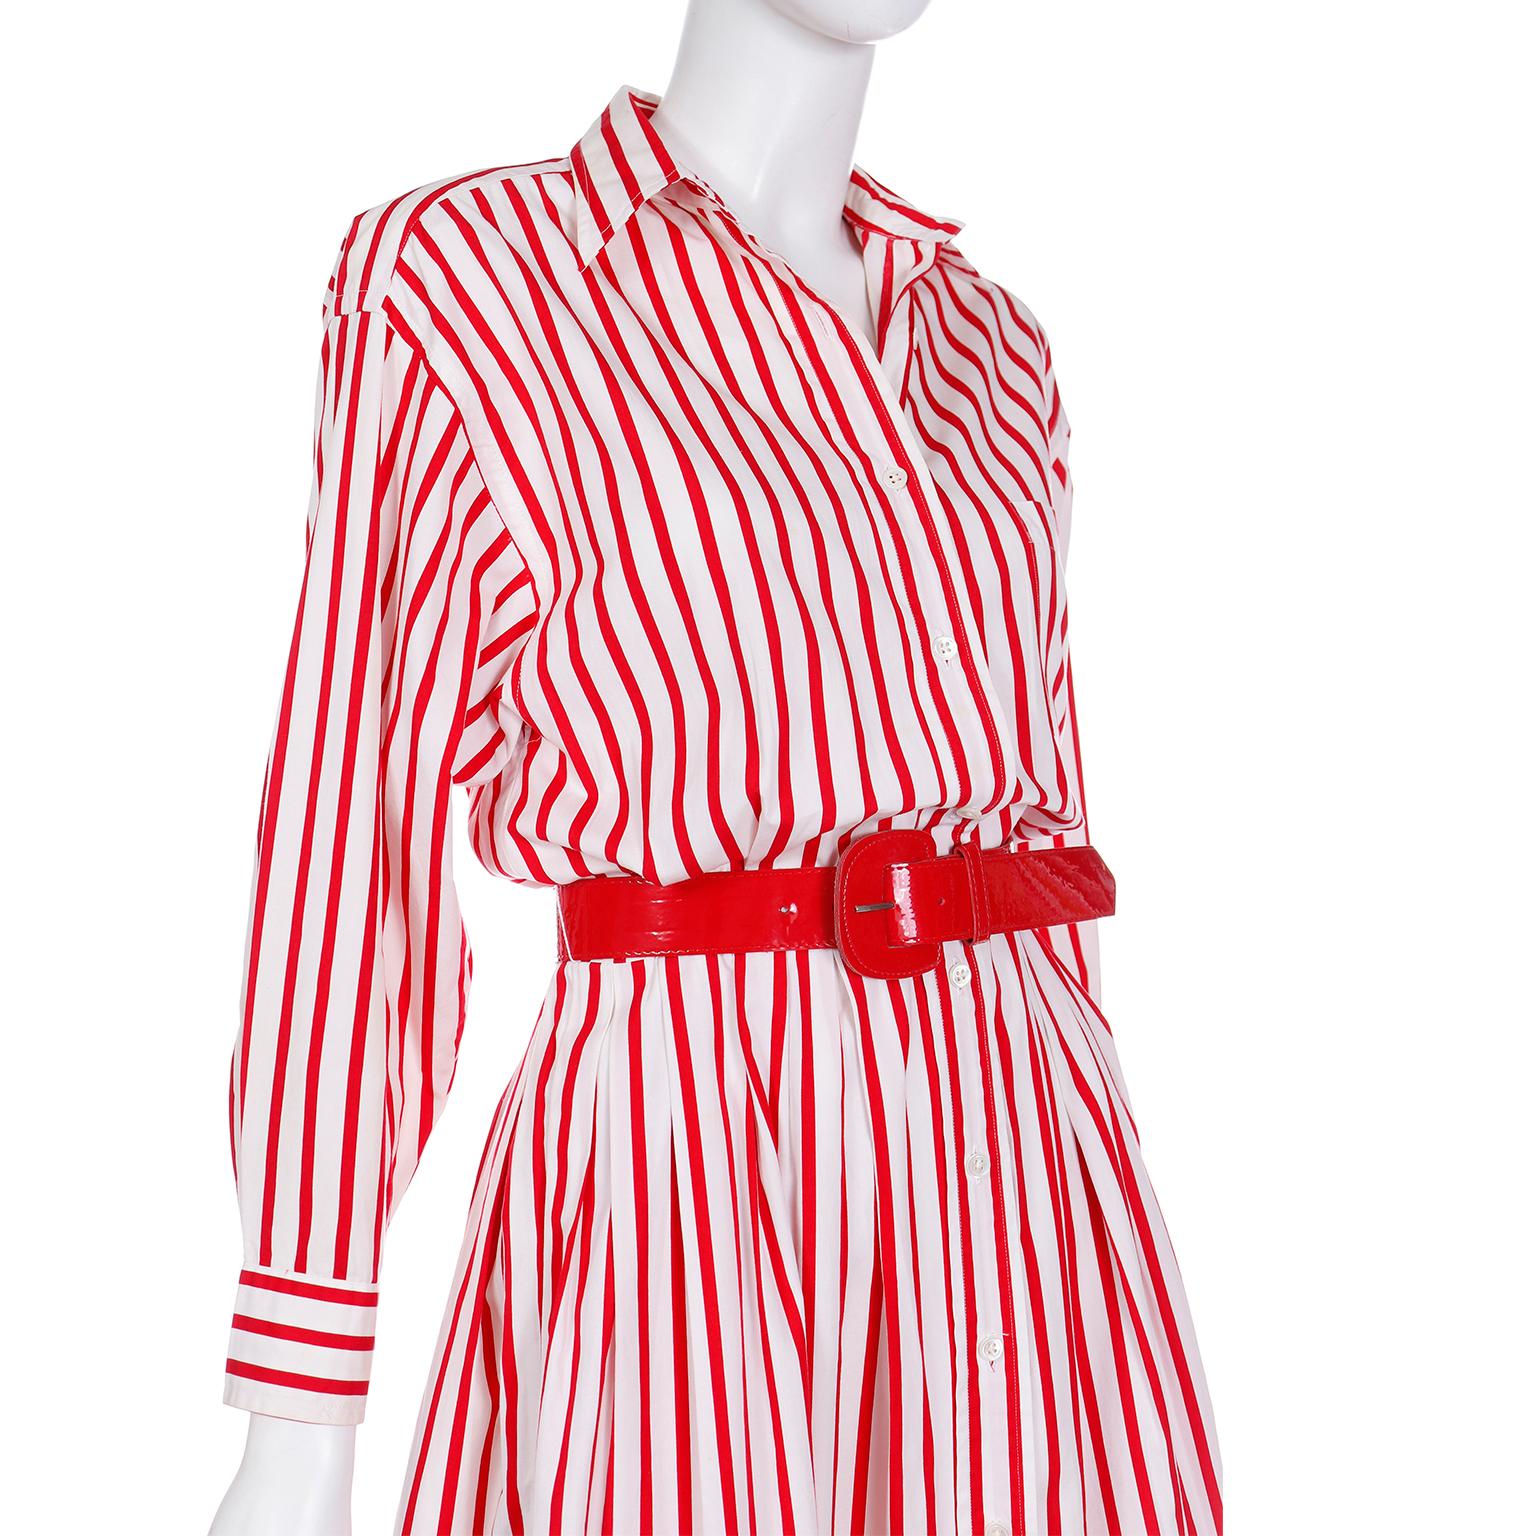 Vintage Ralph Lauren Red & White Striped Shirtdress Style Cotton Day Dress For Sale 3